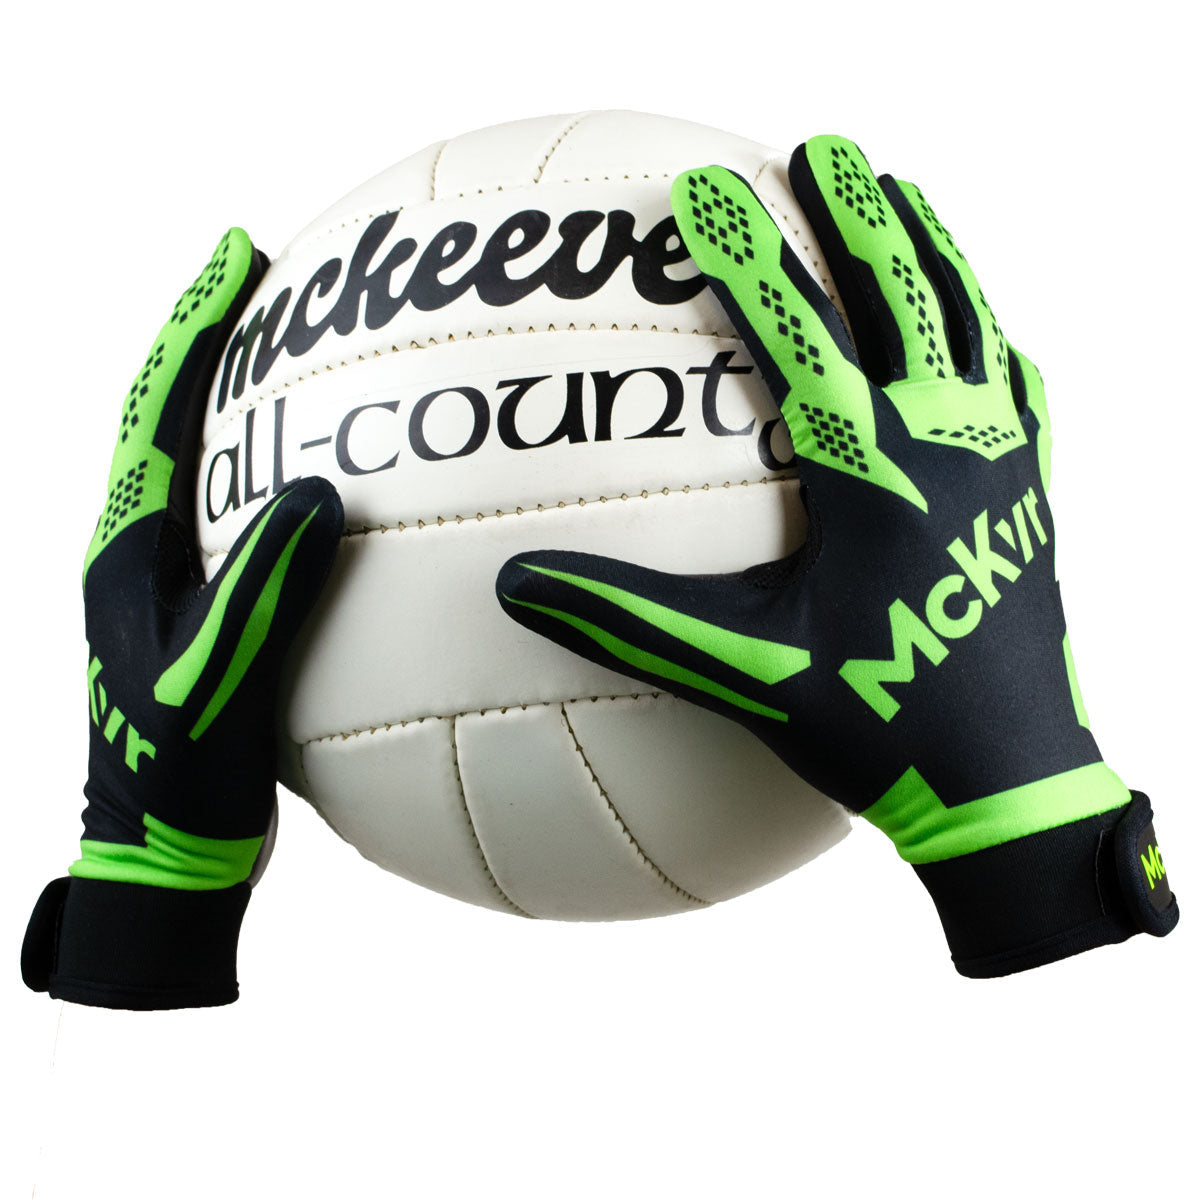 Mc Keever 2.0 Gaelic Gloves - Adult - Black/Lime Green